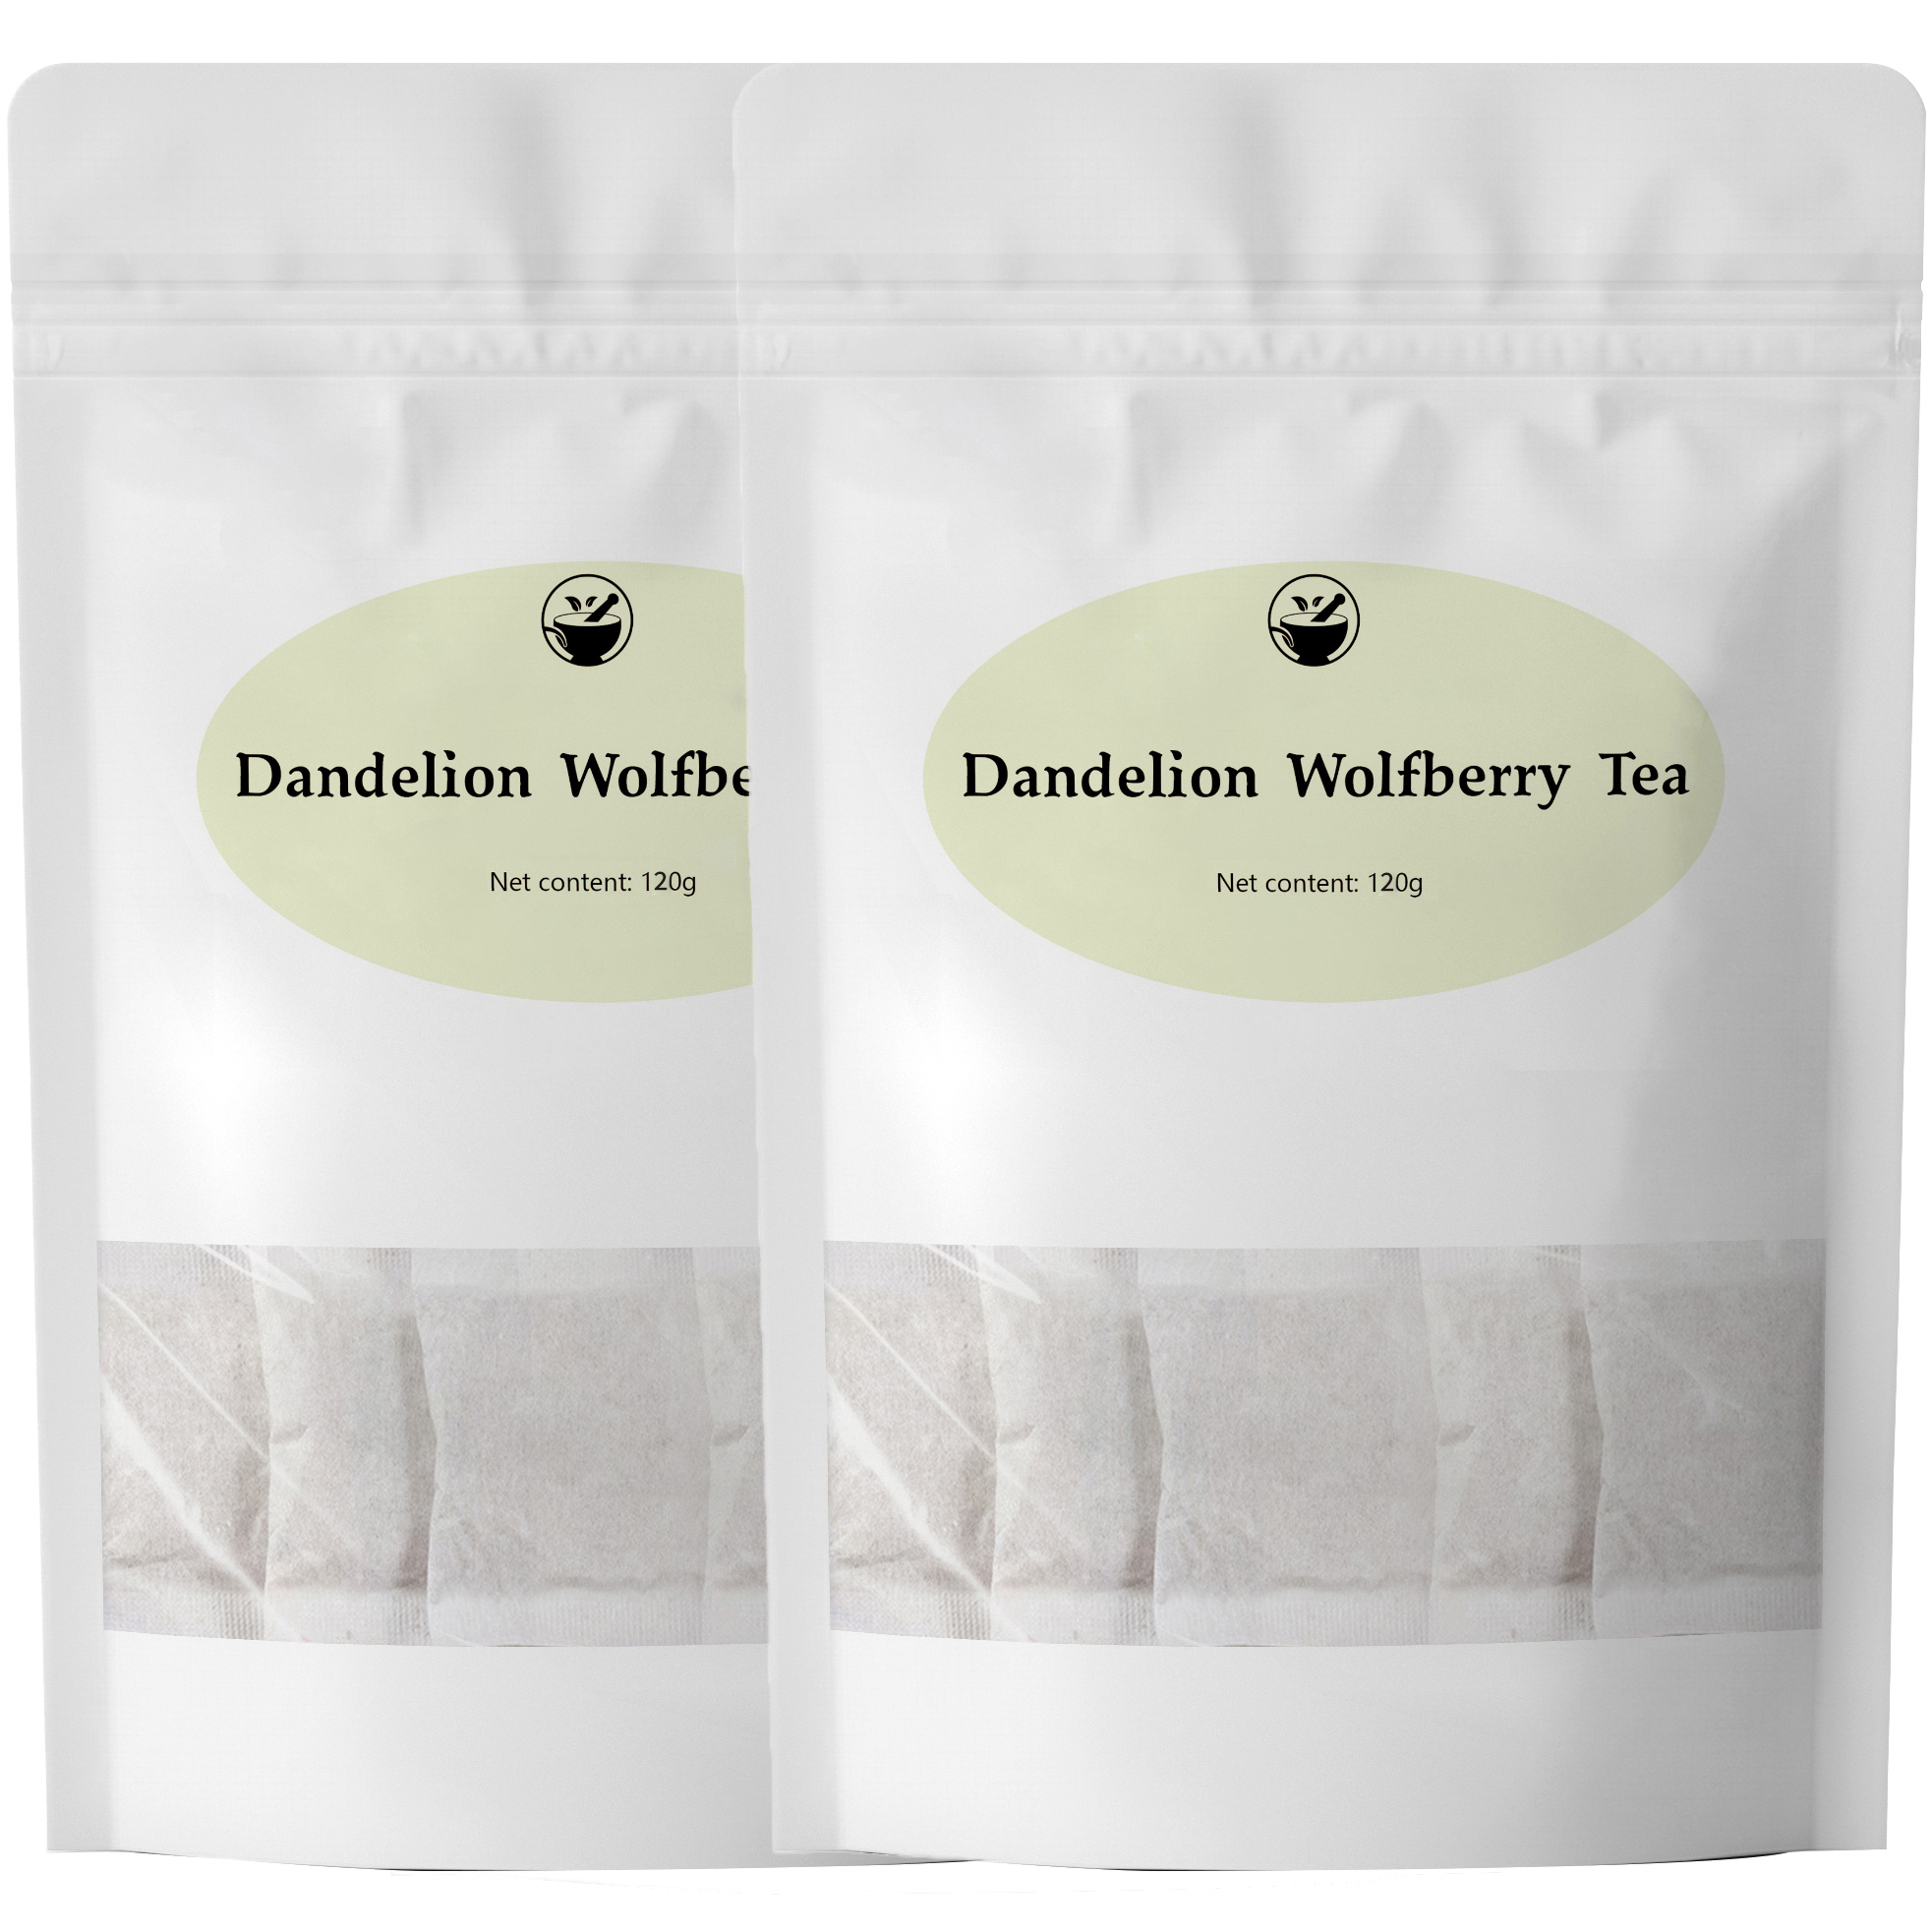 Dandelion Wolfberry Tea, Natural Tea with Dandelion,Wolfberry, Cassia Seed and Chrysanthemum 30 Teabags per Pack